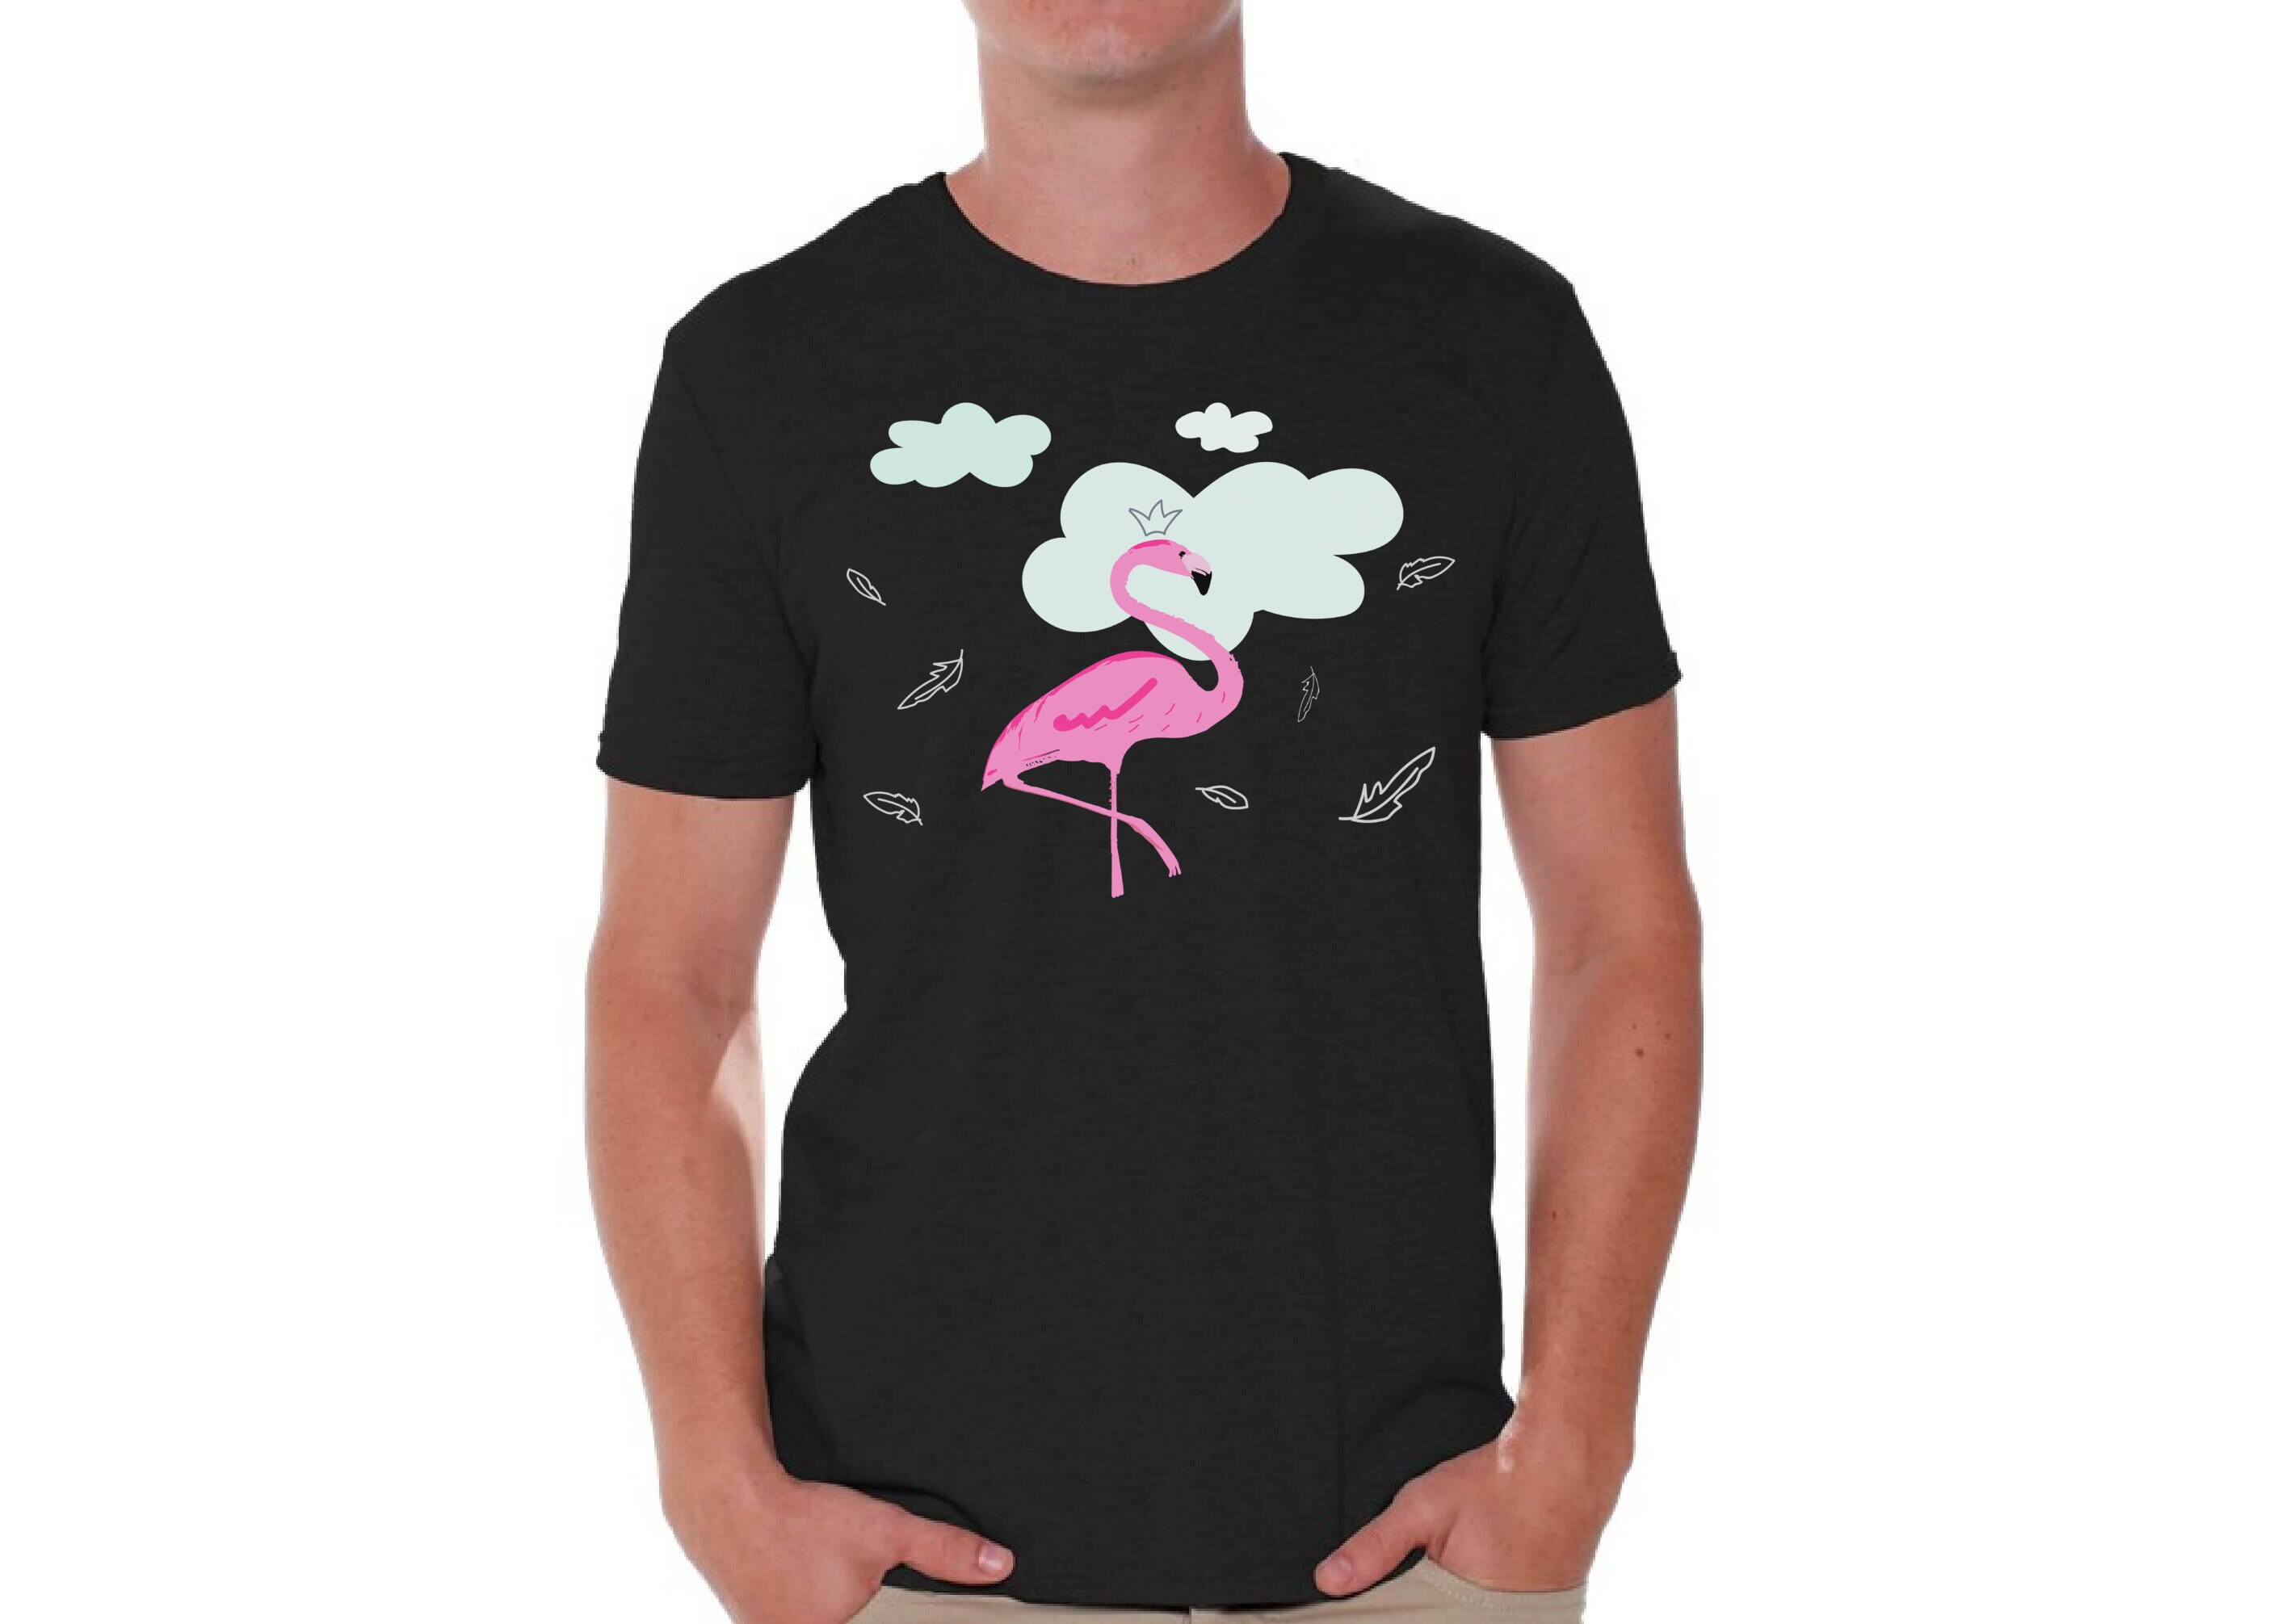 Flamingo in Clouds. T Shirt for Men. Pink Flamingo Shirts. | Etsy